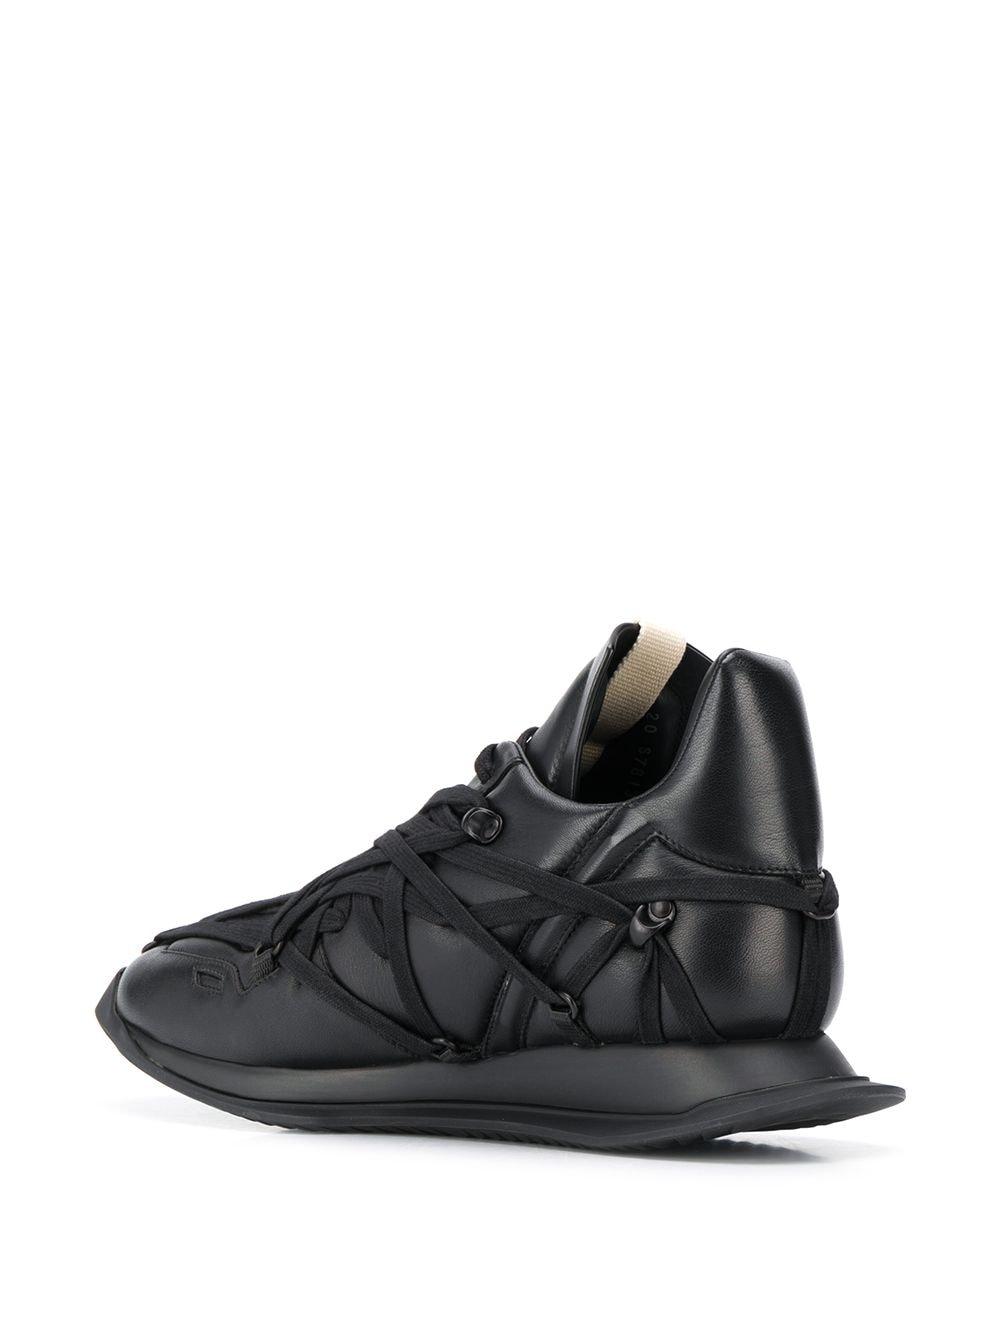 Rick Owens Leather Maximal Runner Sneakers in Black for Men | Lyst